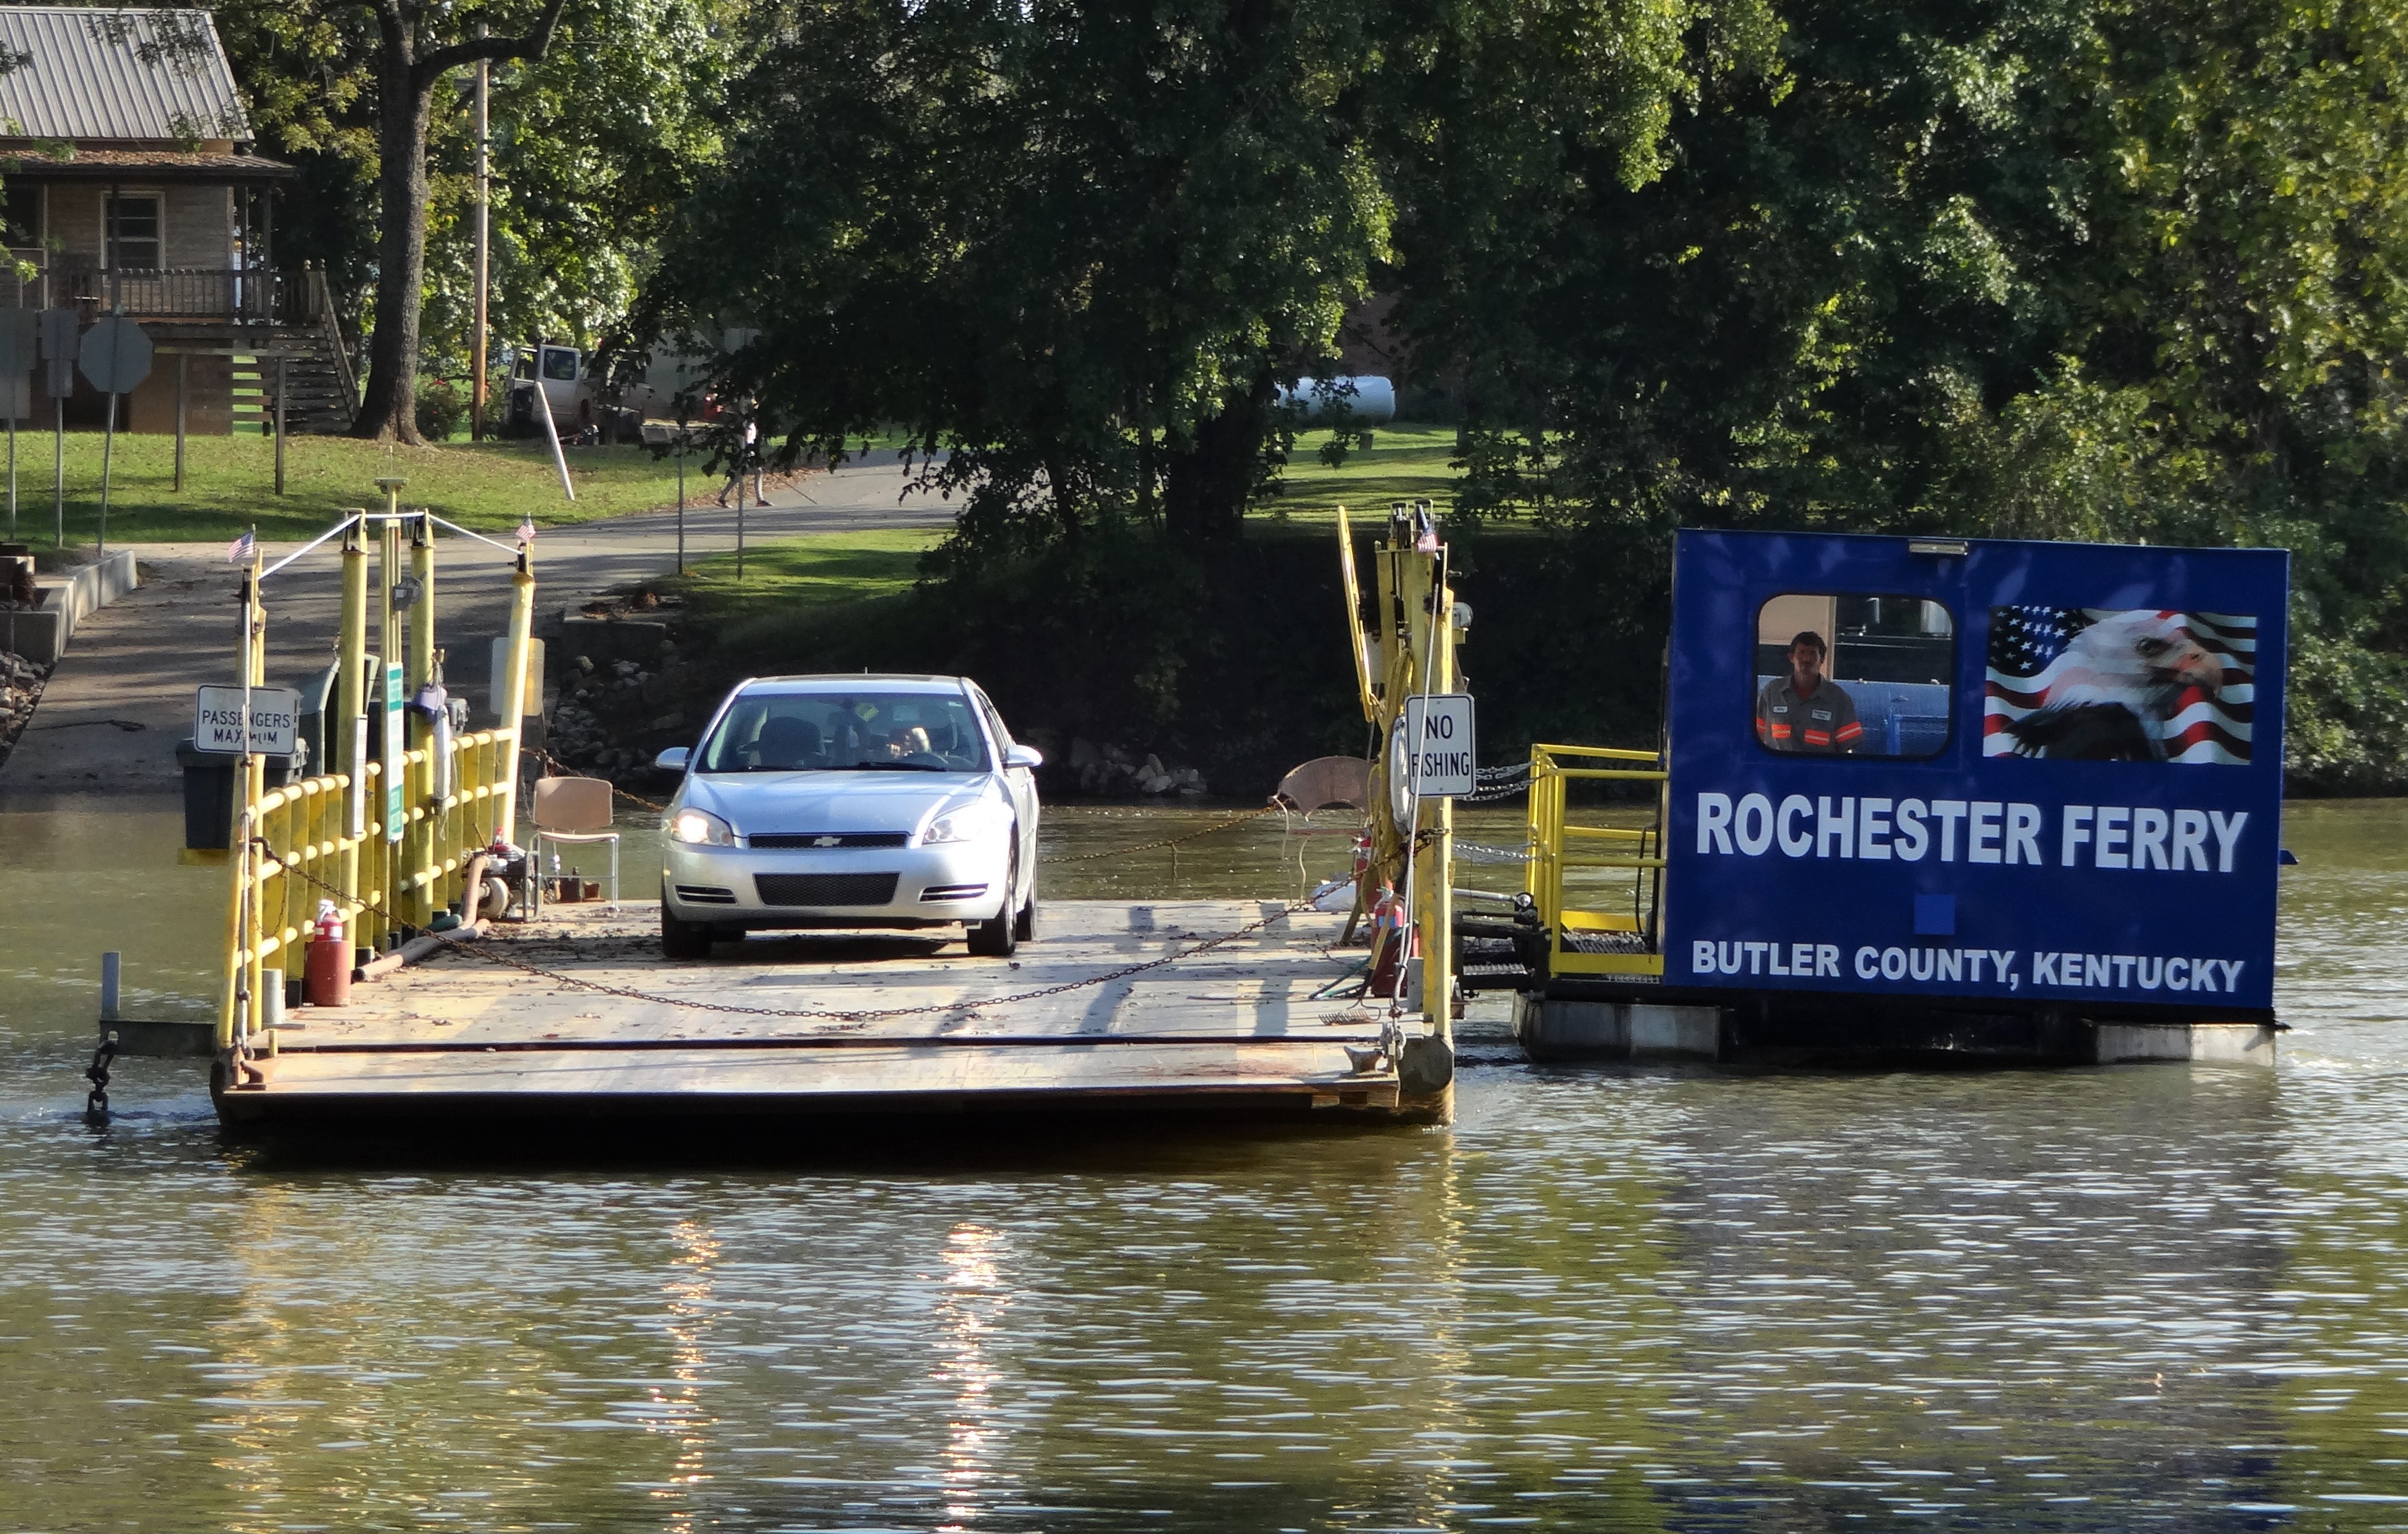 Rochester ferryboat ferrying vehciles across the green river